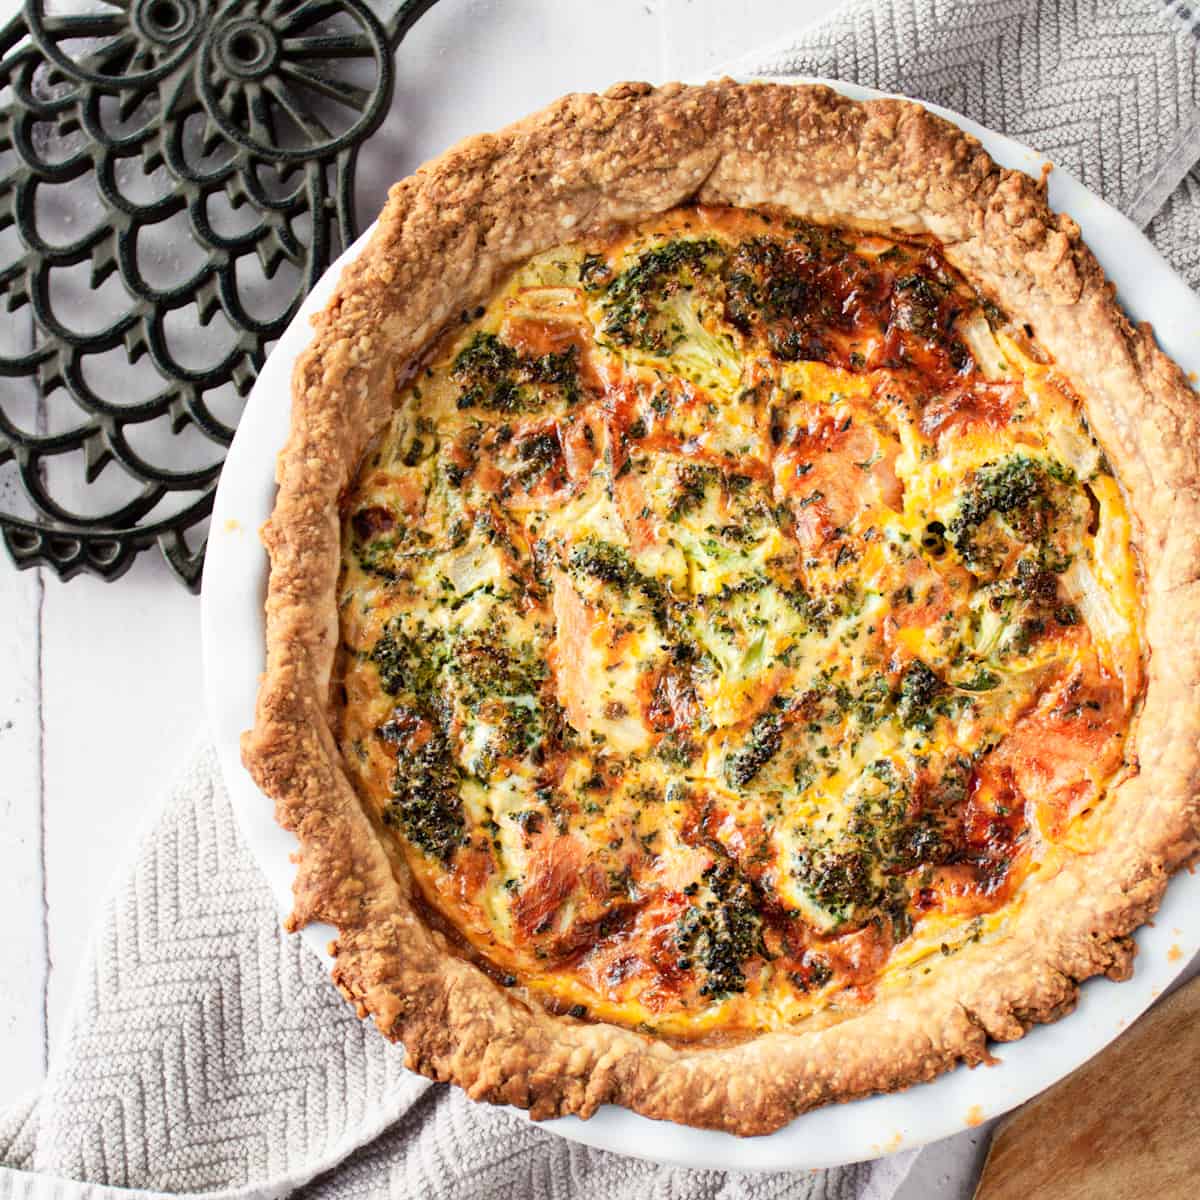 Salmon and broccoli quiche with a homemade, rustic looking pie crust in a white dish.